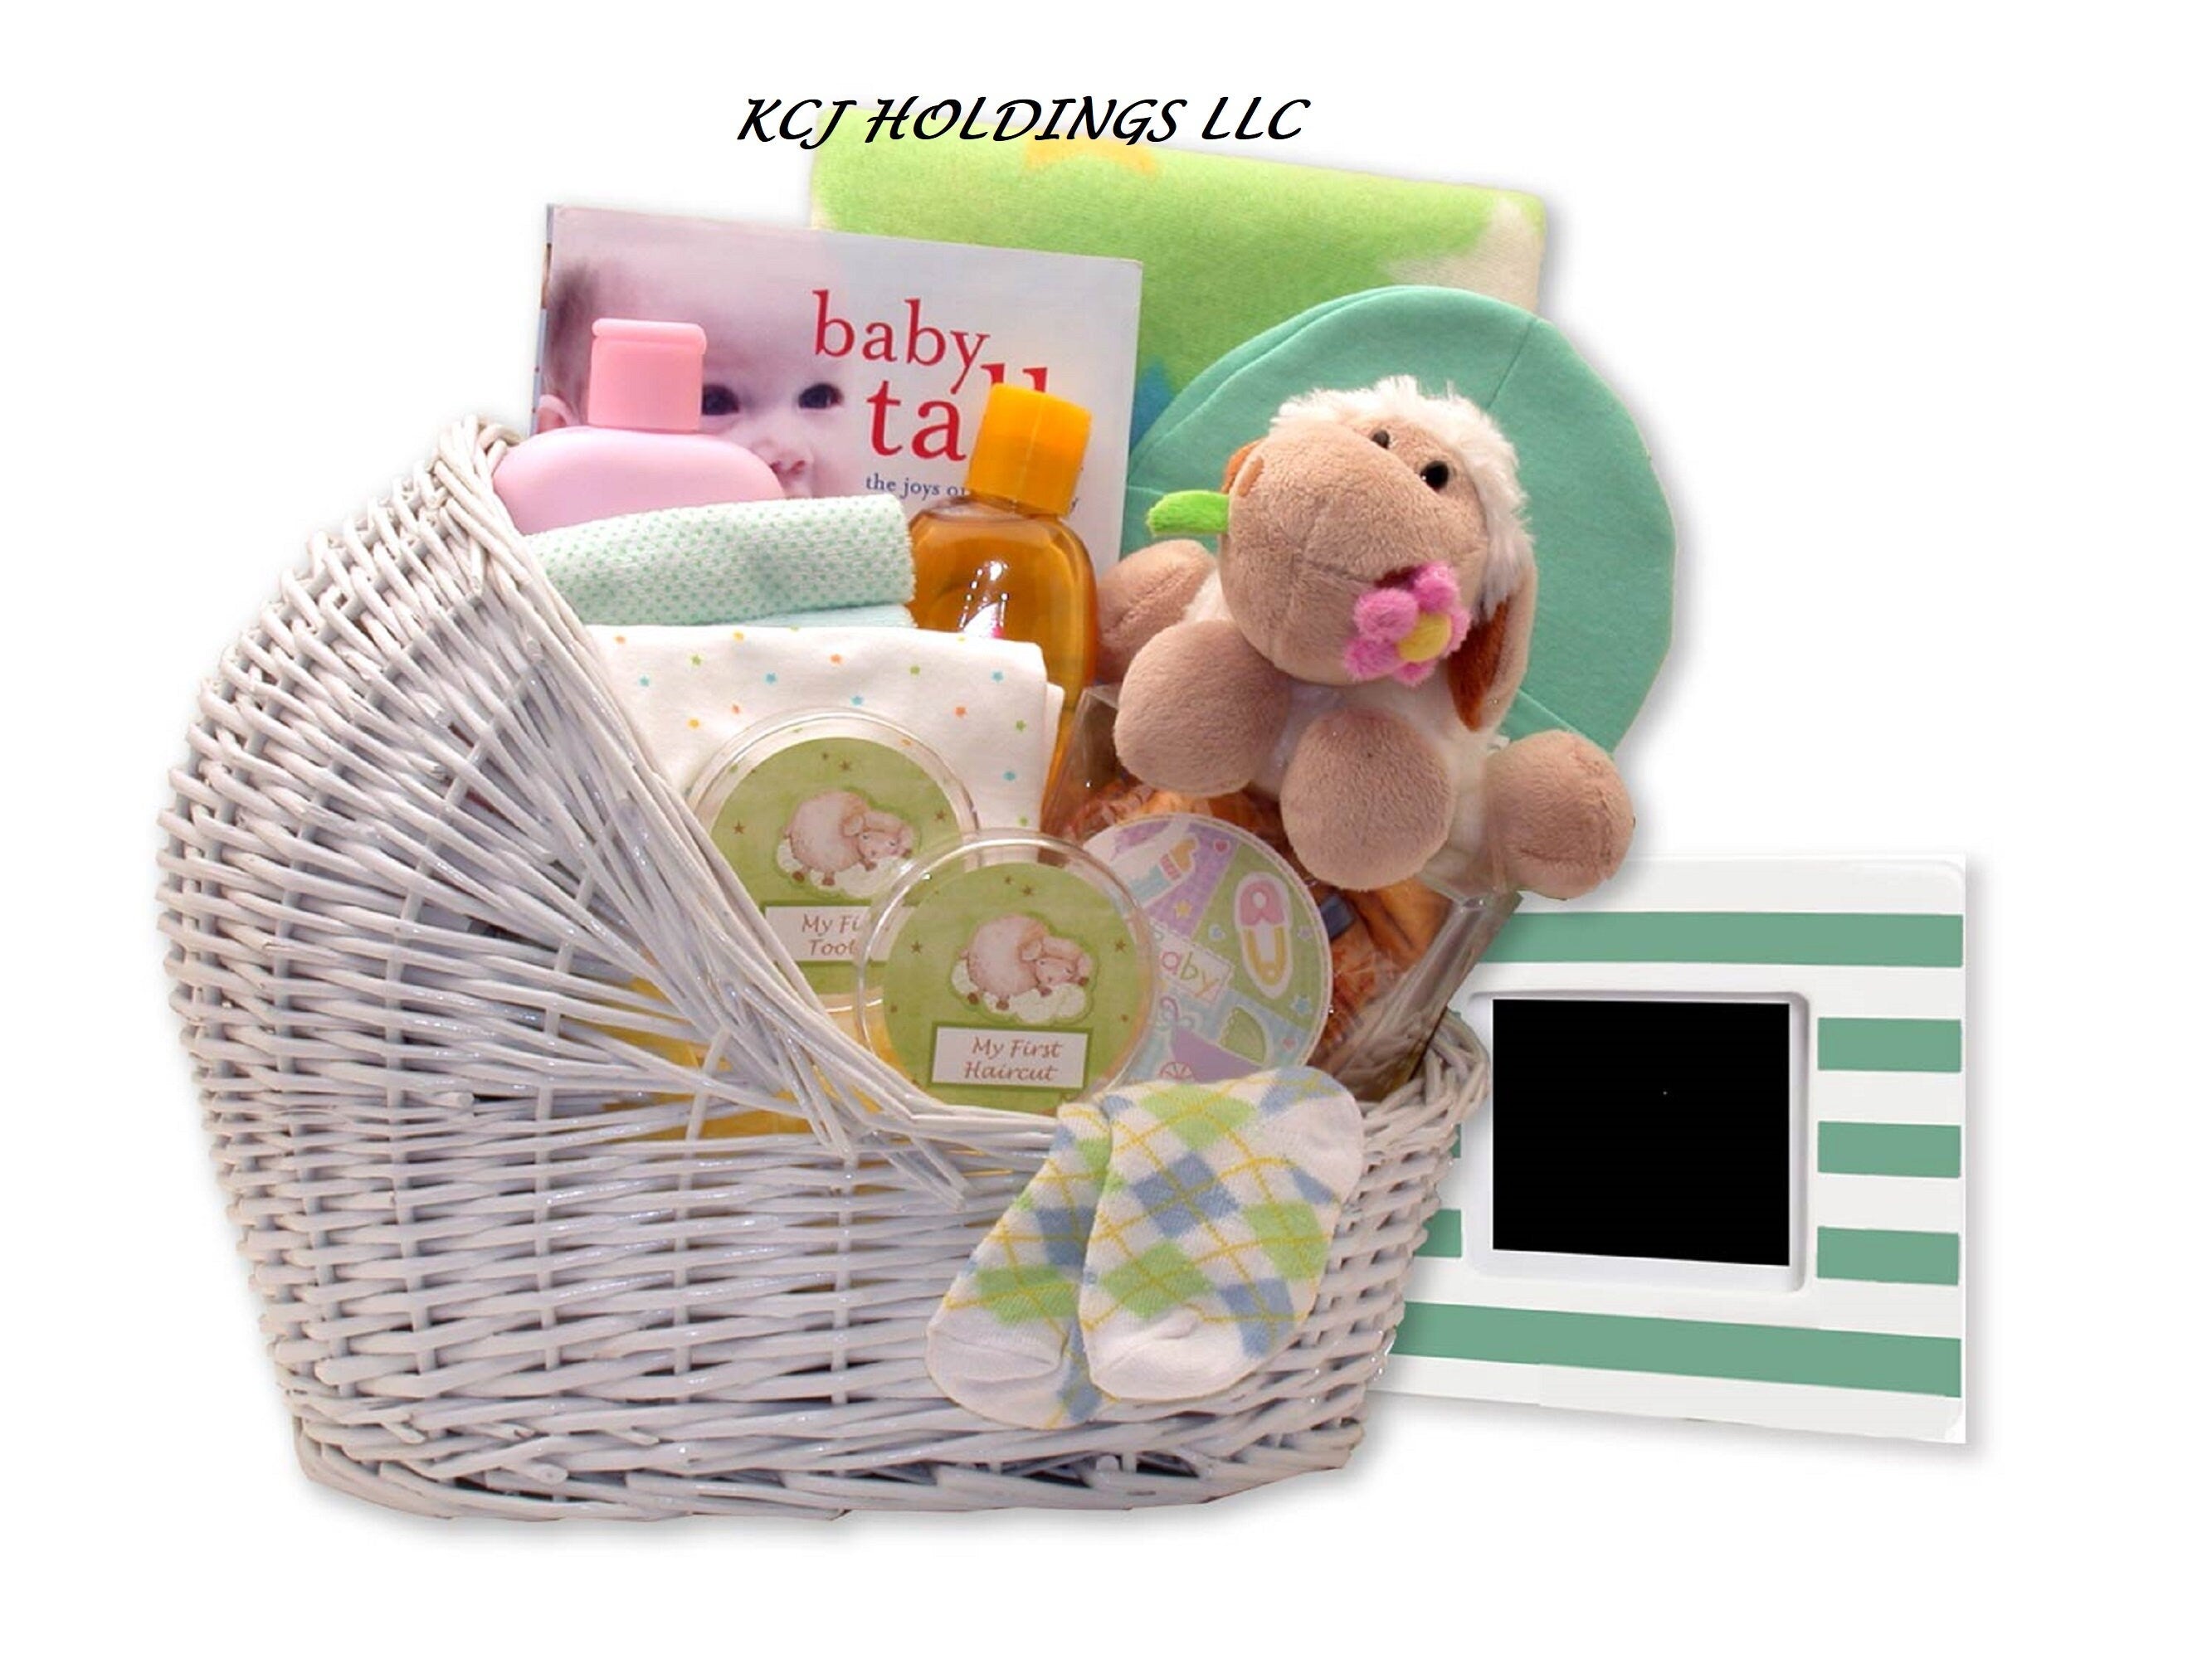 Gray 5-Piece Baby Gift Basket for Baby Shower/Newborn Welcome Home